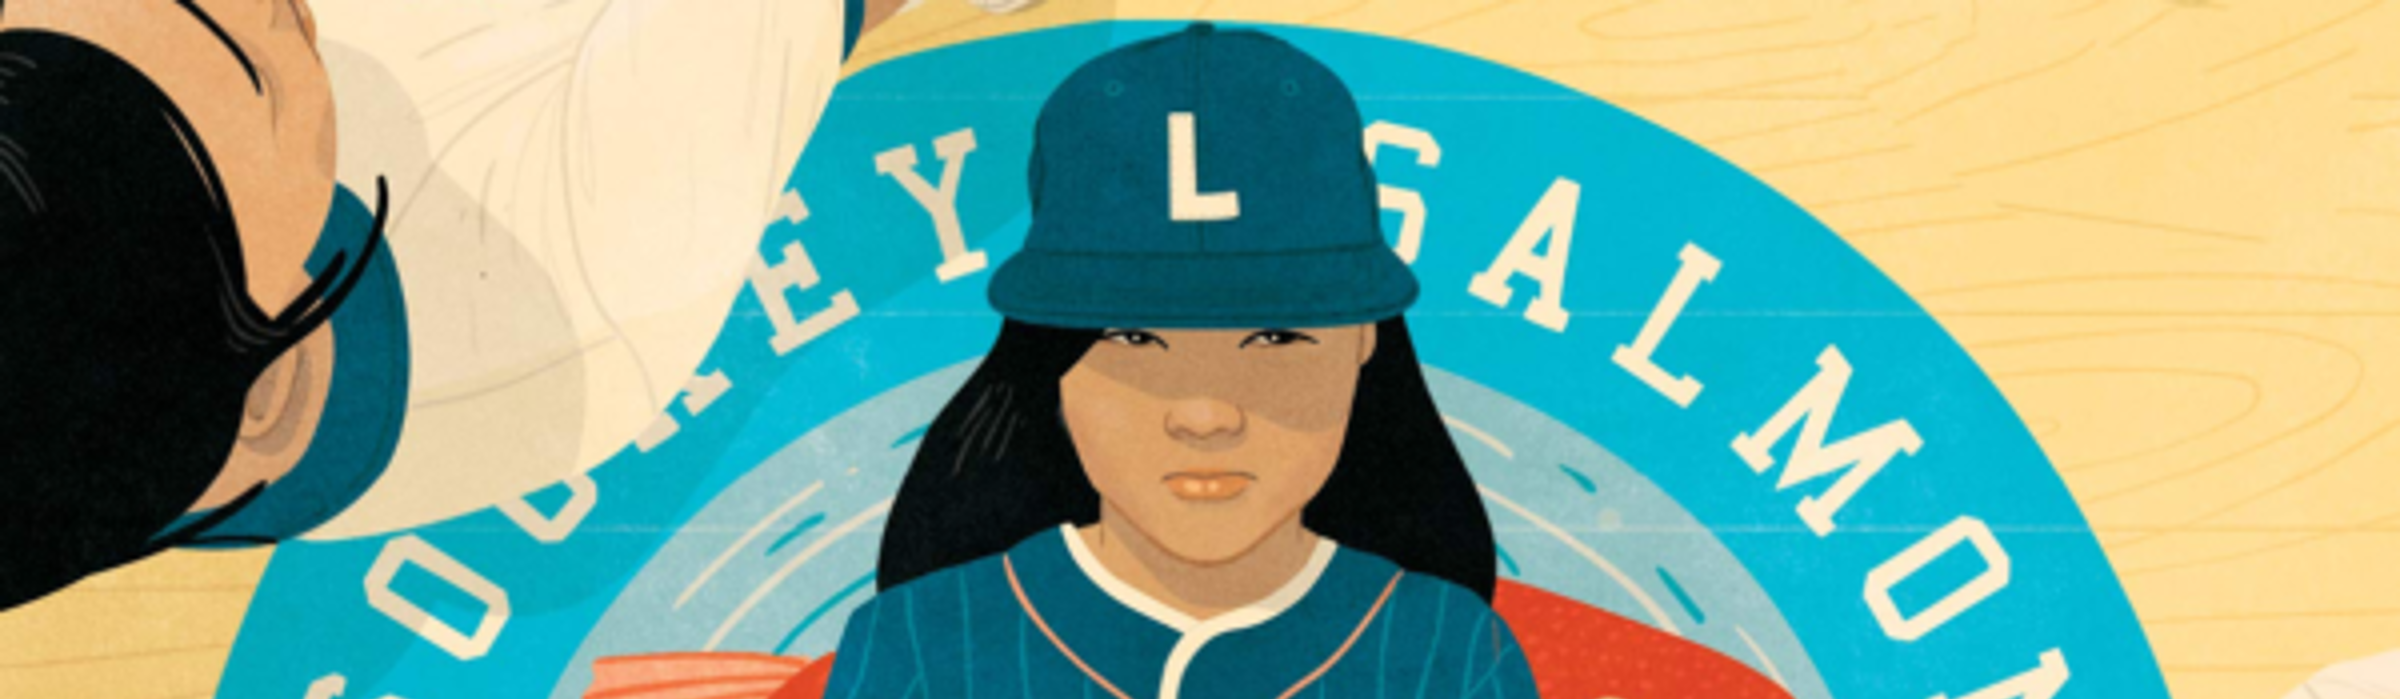 Lupe Wong Won’t Dance by Donna Barba Higuera – Book Review